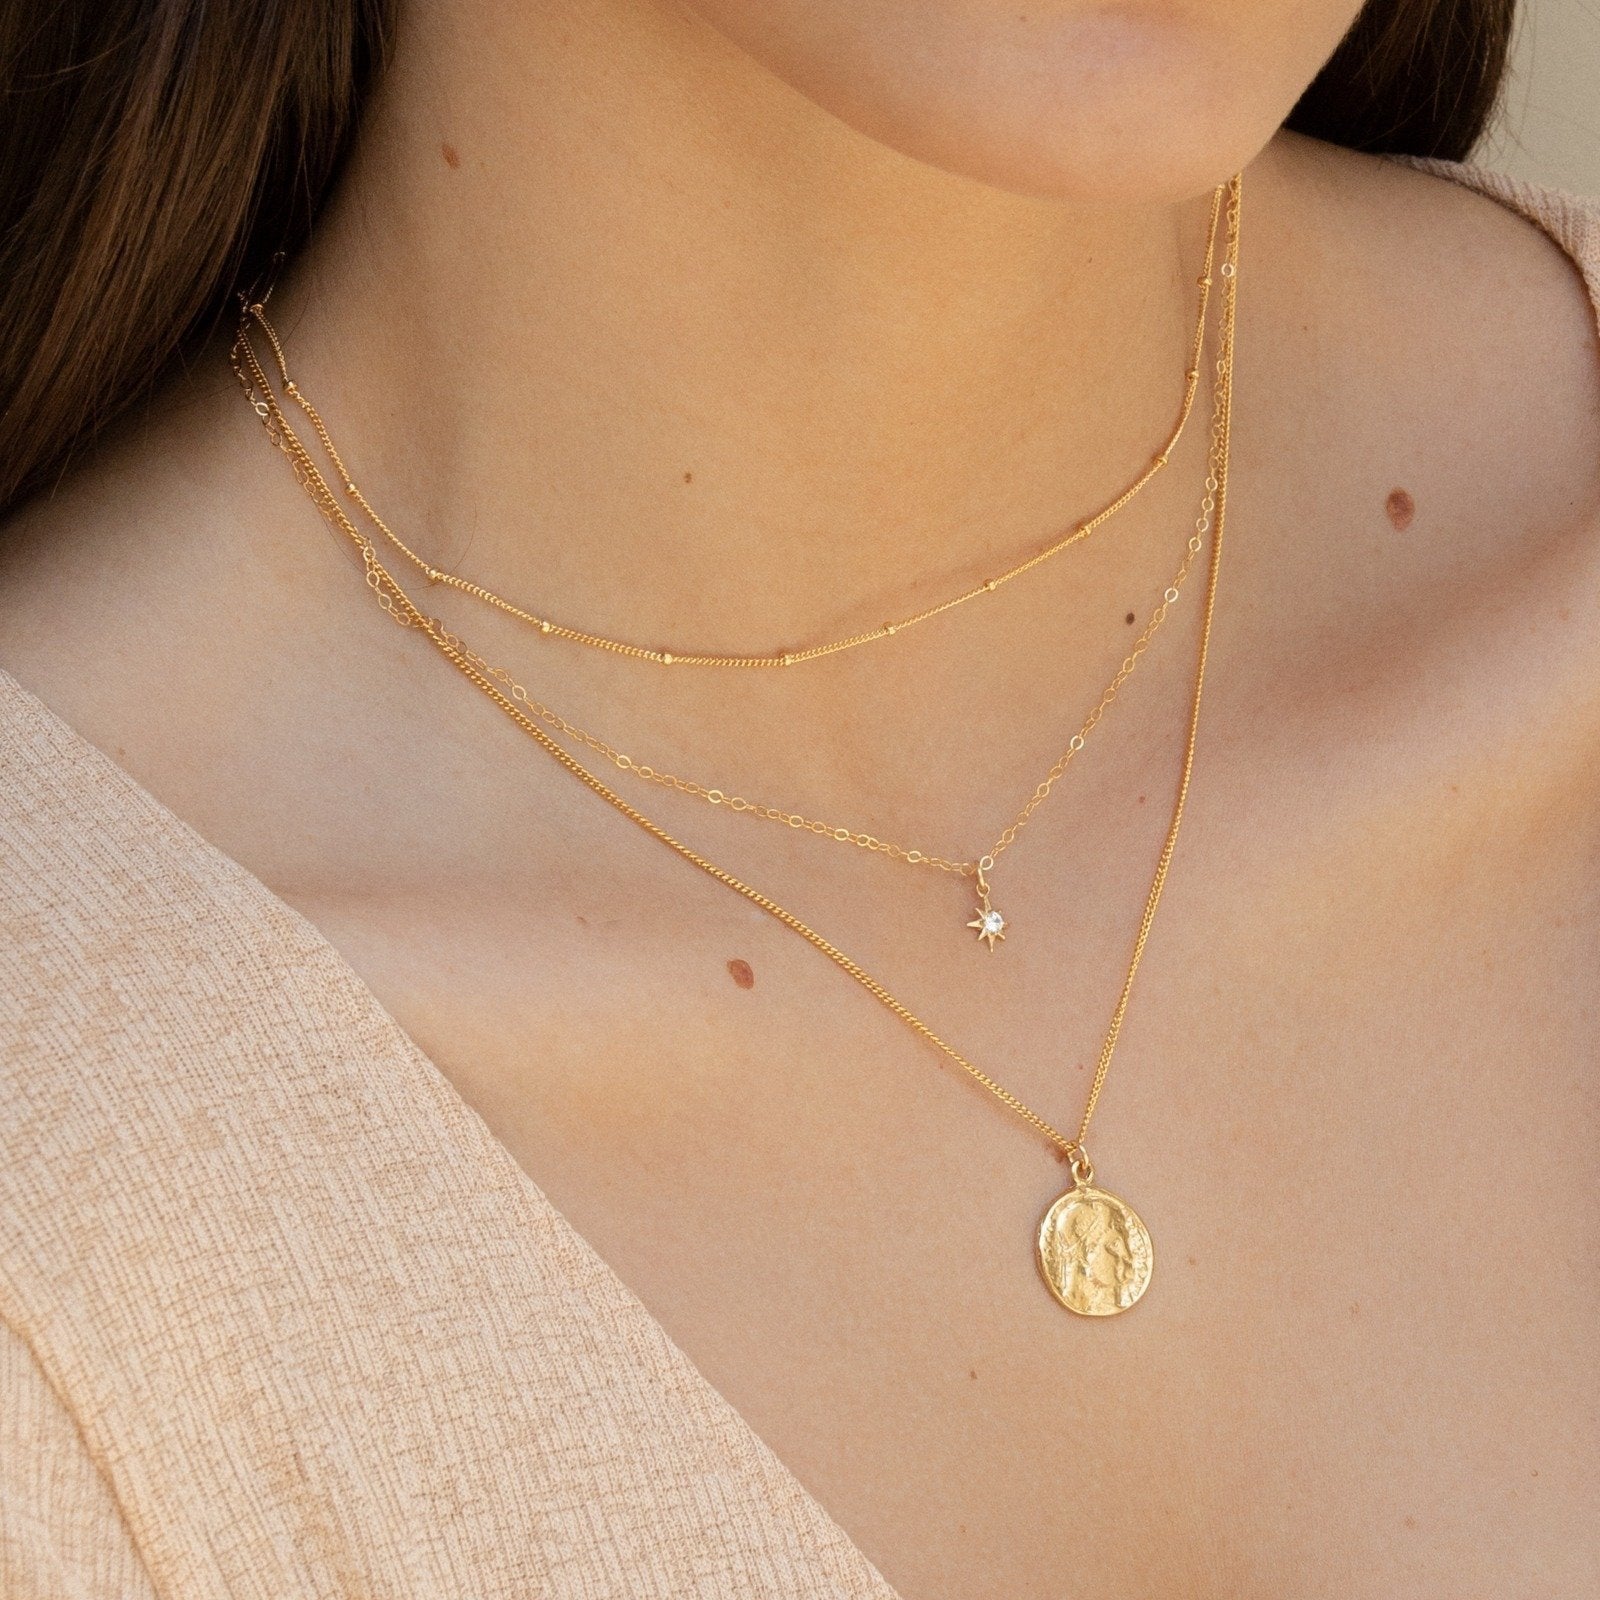 Gold Layering Necklaces  Chain necklace outfit, Fancy jewelry